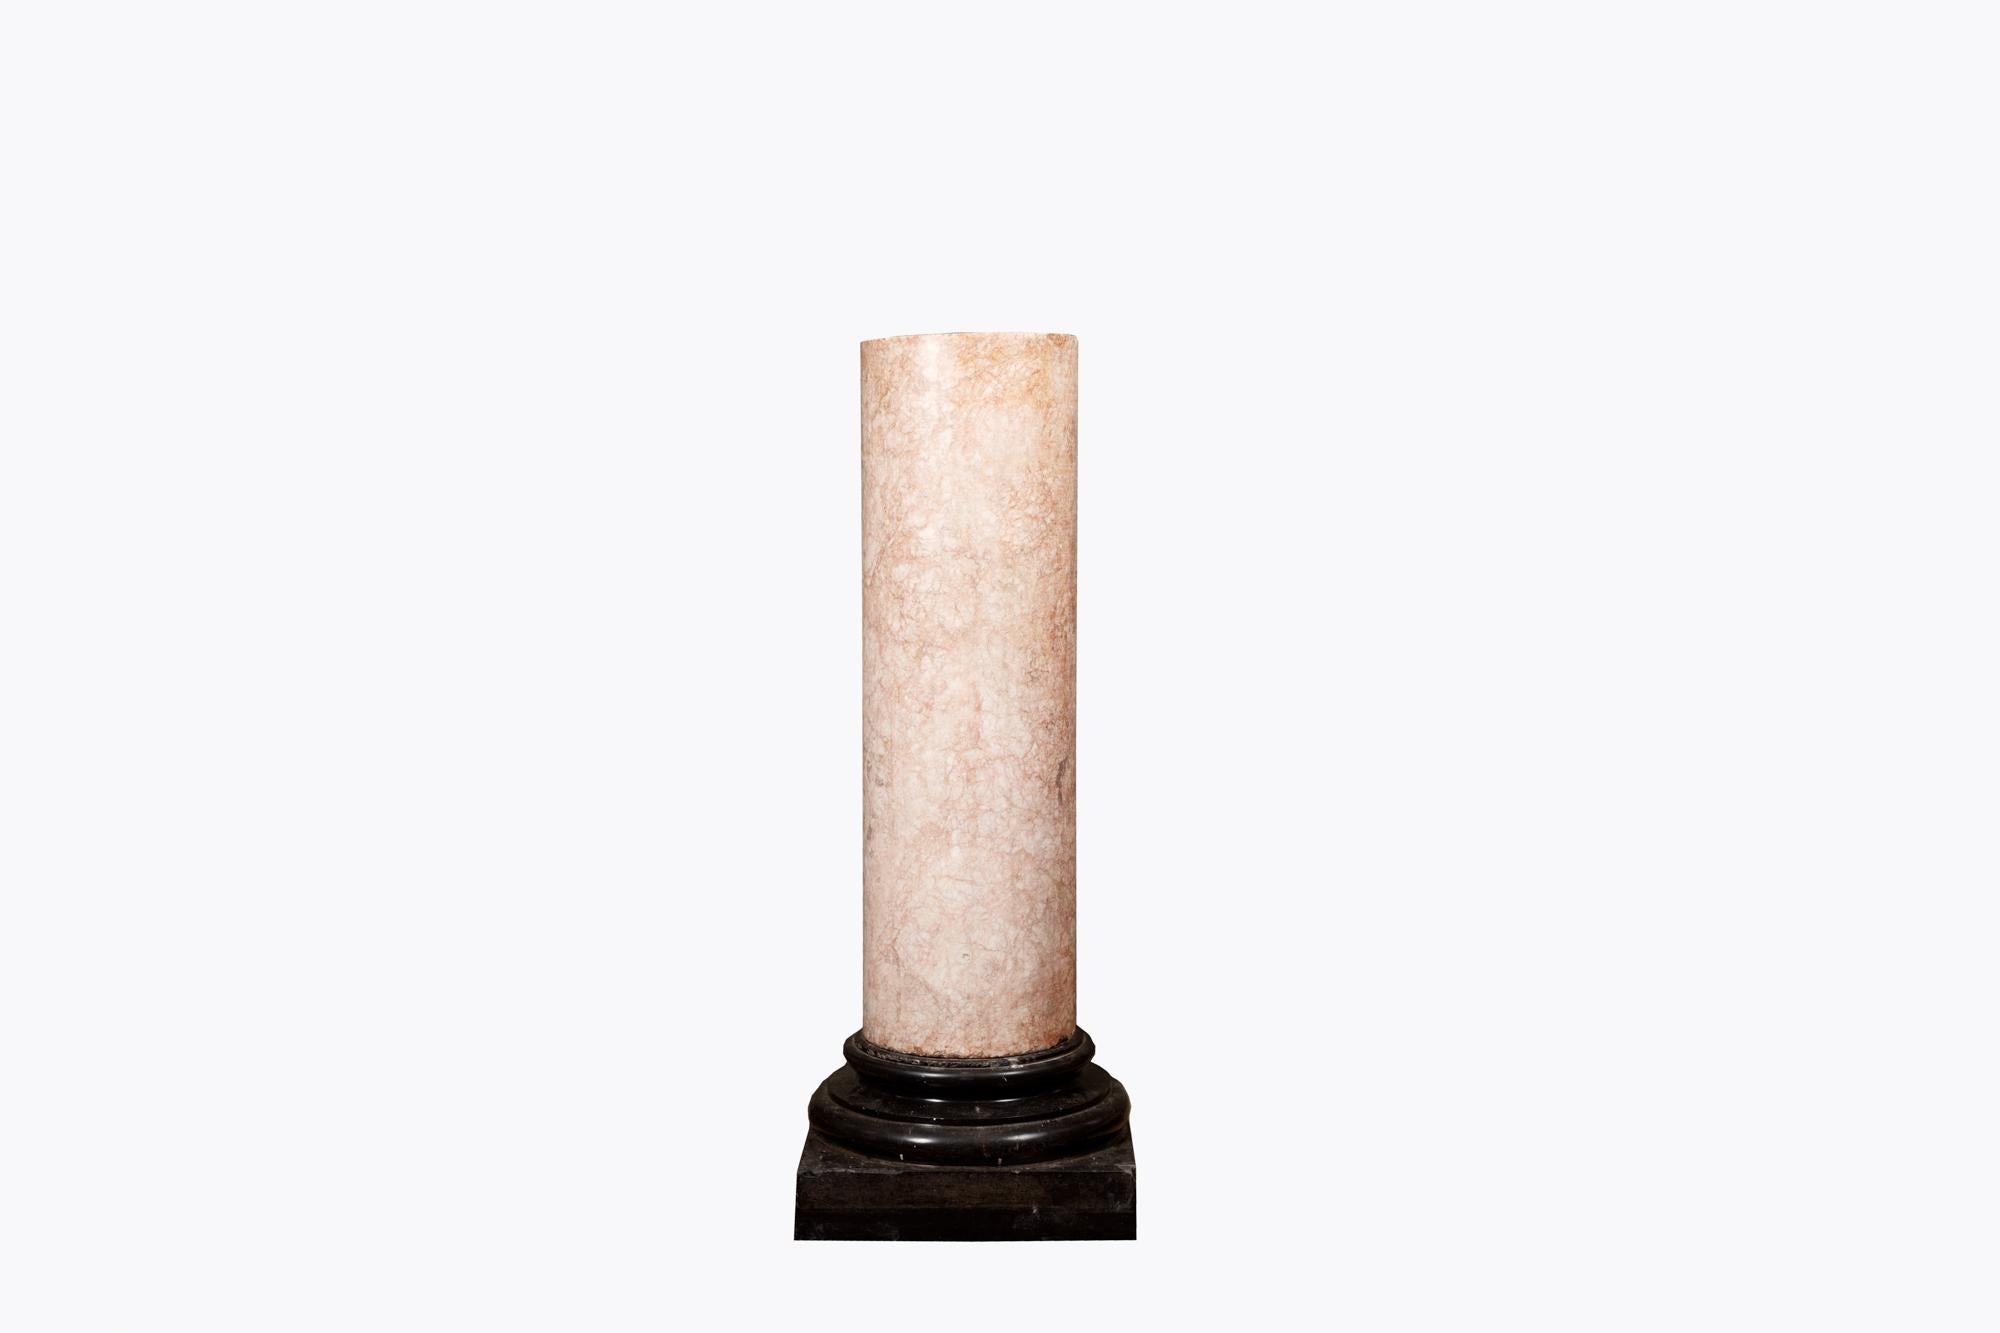 19th Century Rosé Boréal pillar in the form of a classical column. The solid cylindrical barrel, in a blush coloured Rosé Boréal stone rests on a squared base of black marble.